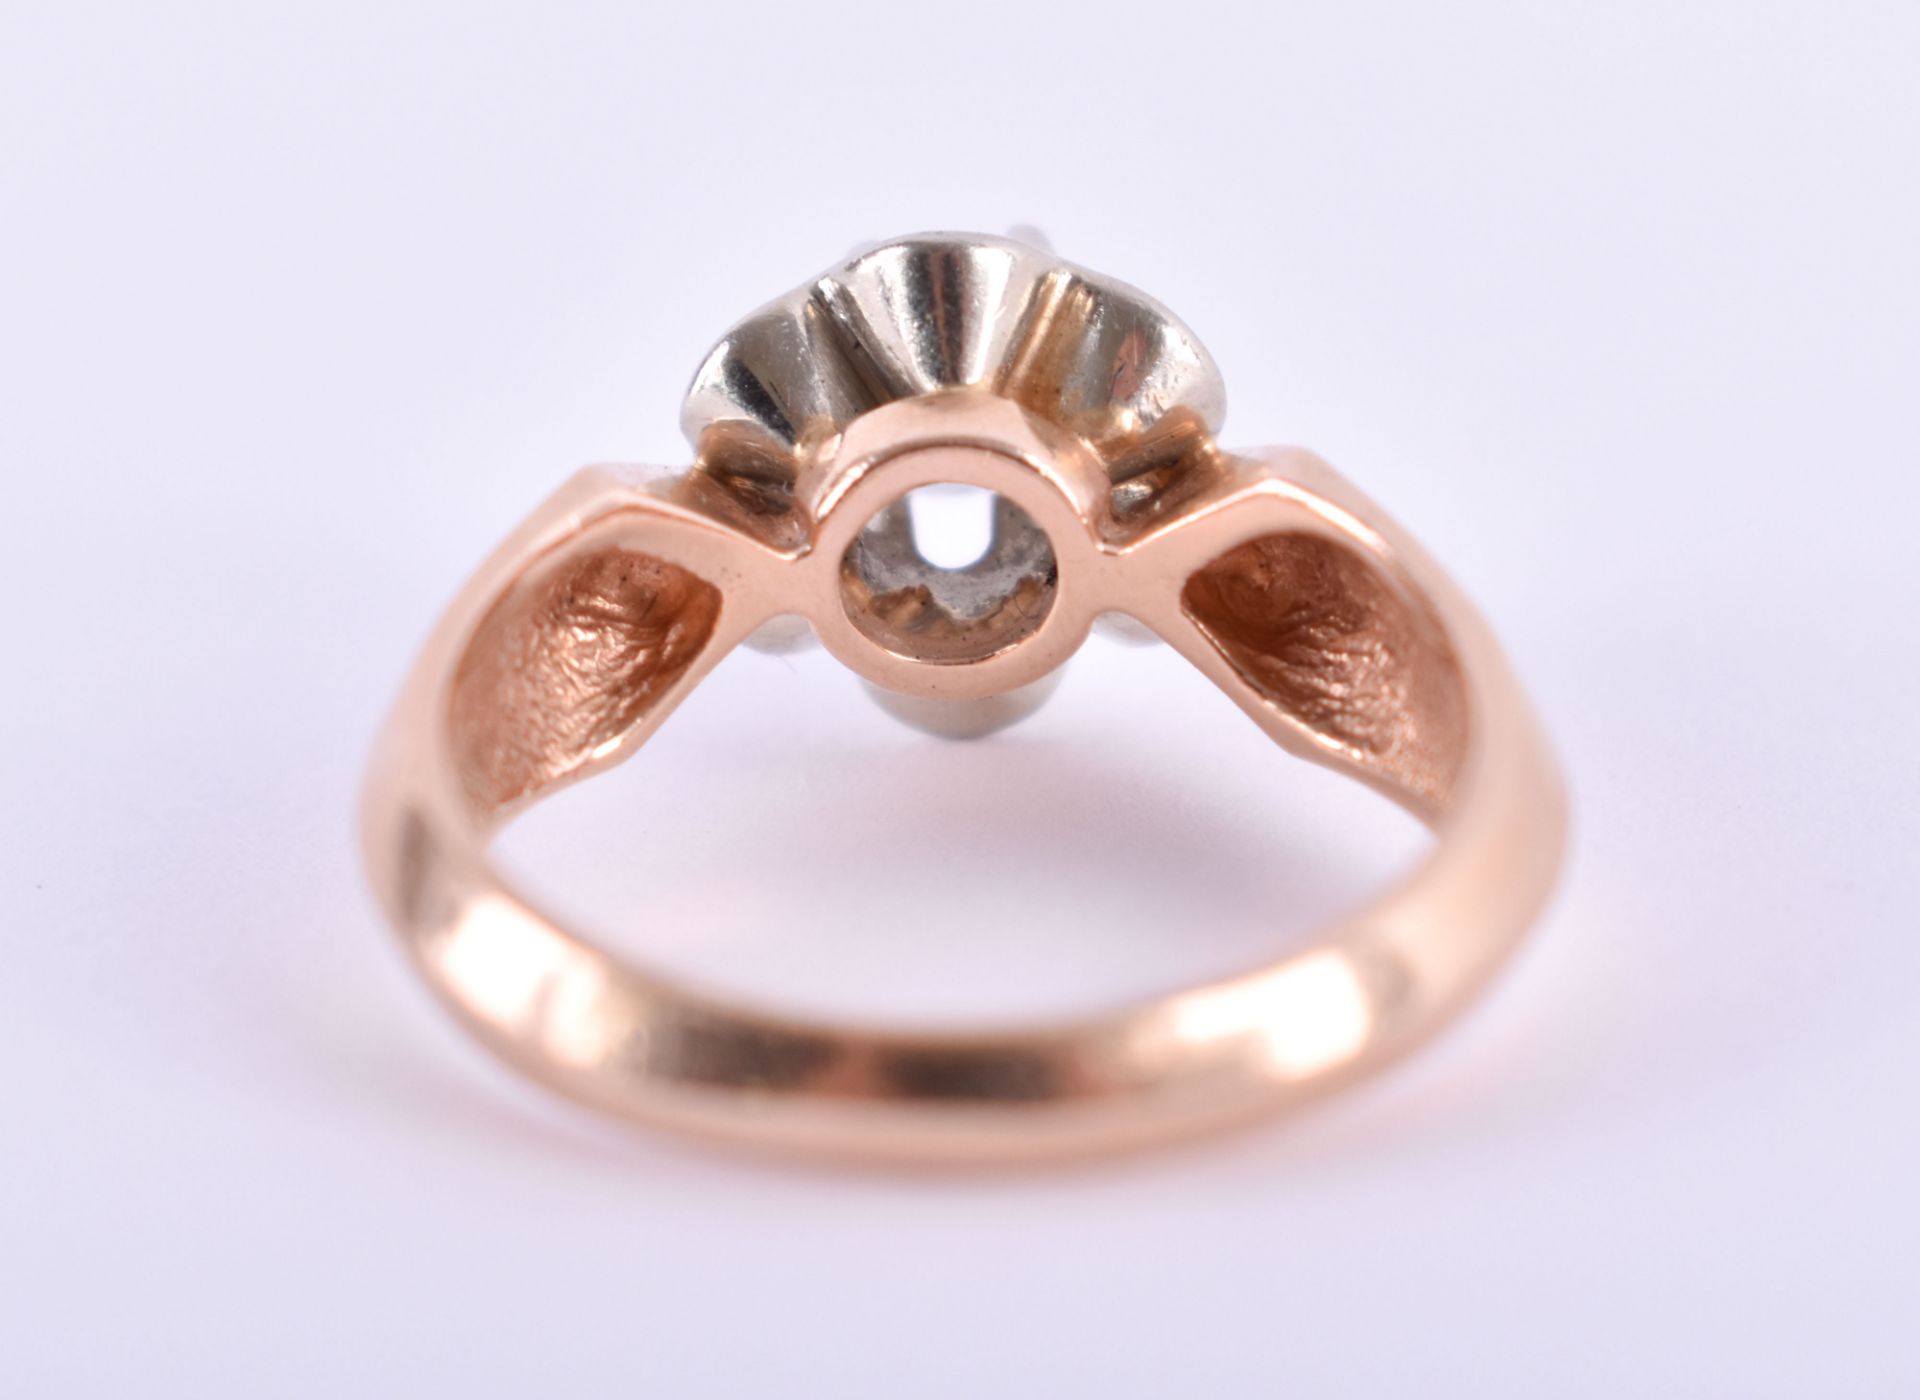  Solitaire diamond ring - Image 6 of 6